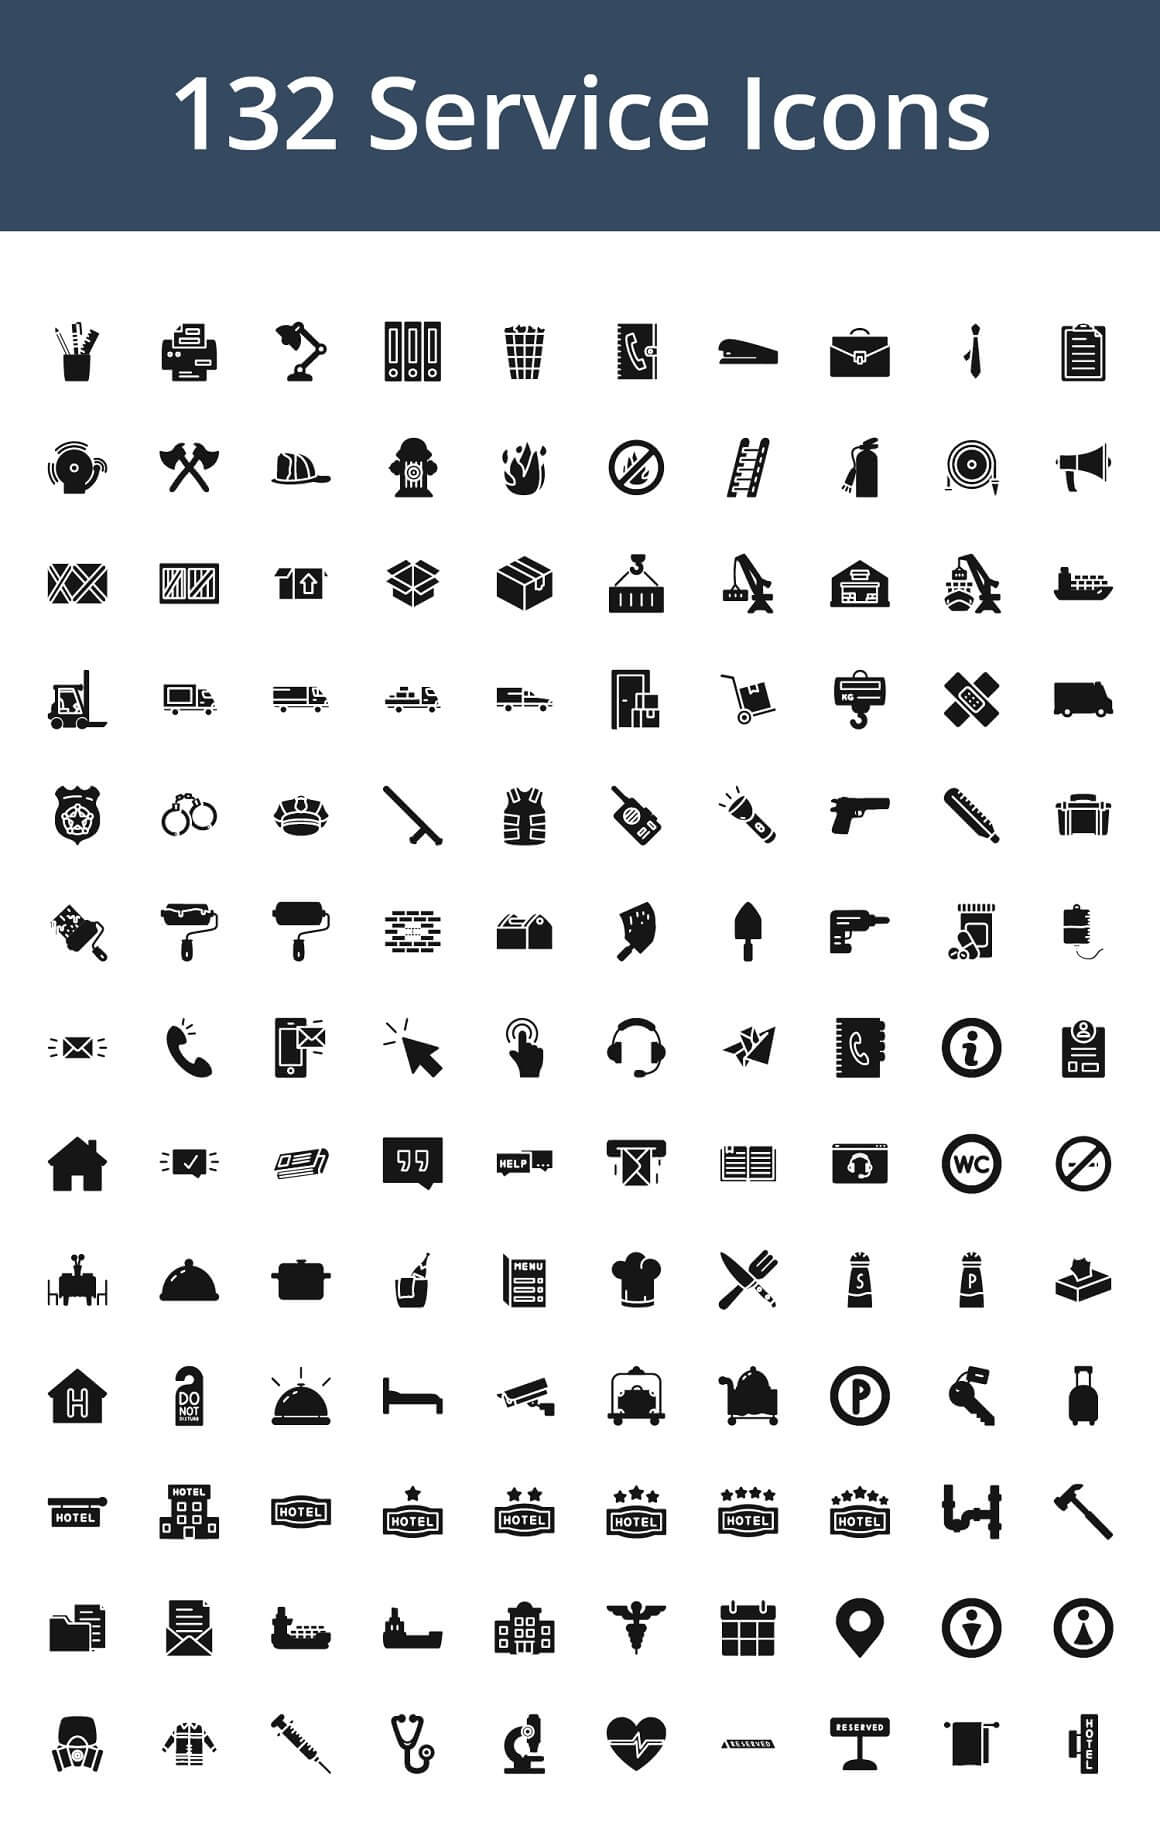 Preview 132 Service Icons.